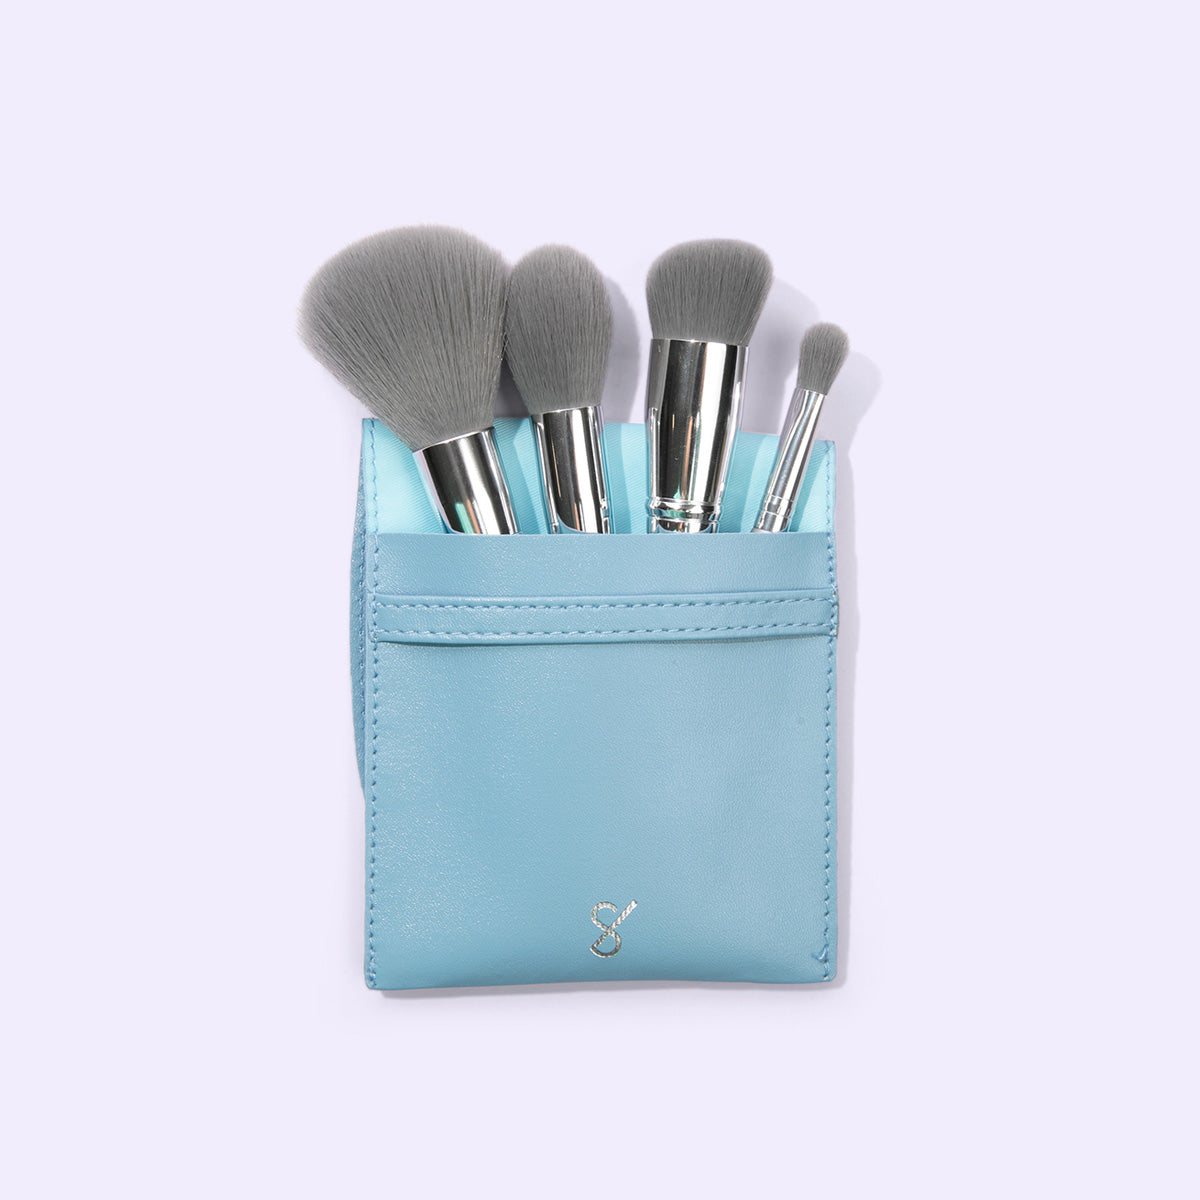 Microfiber Brushes 100 count – /SHēk/ Beauty Collection